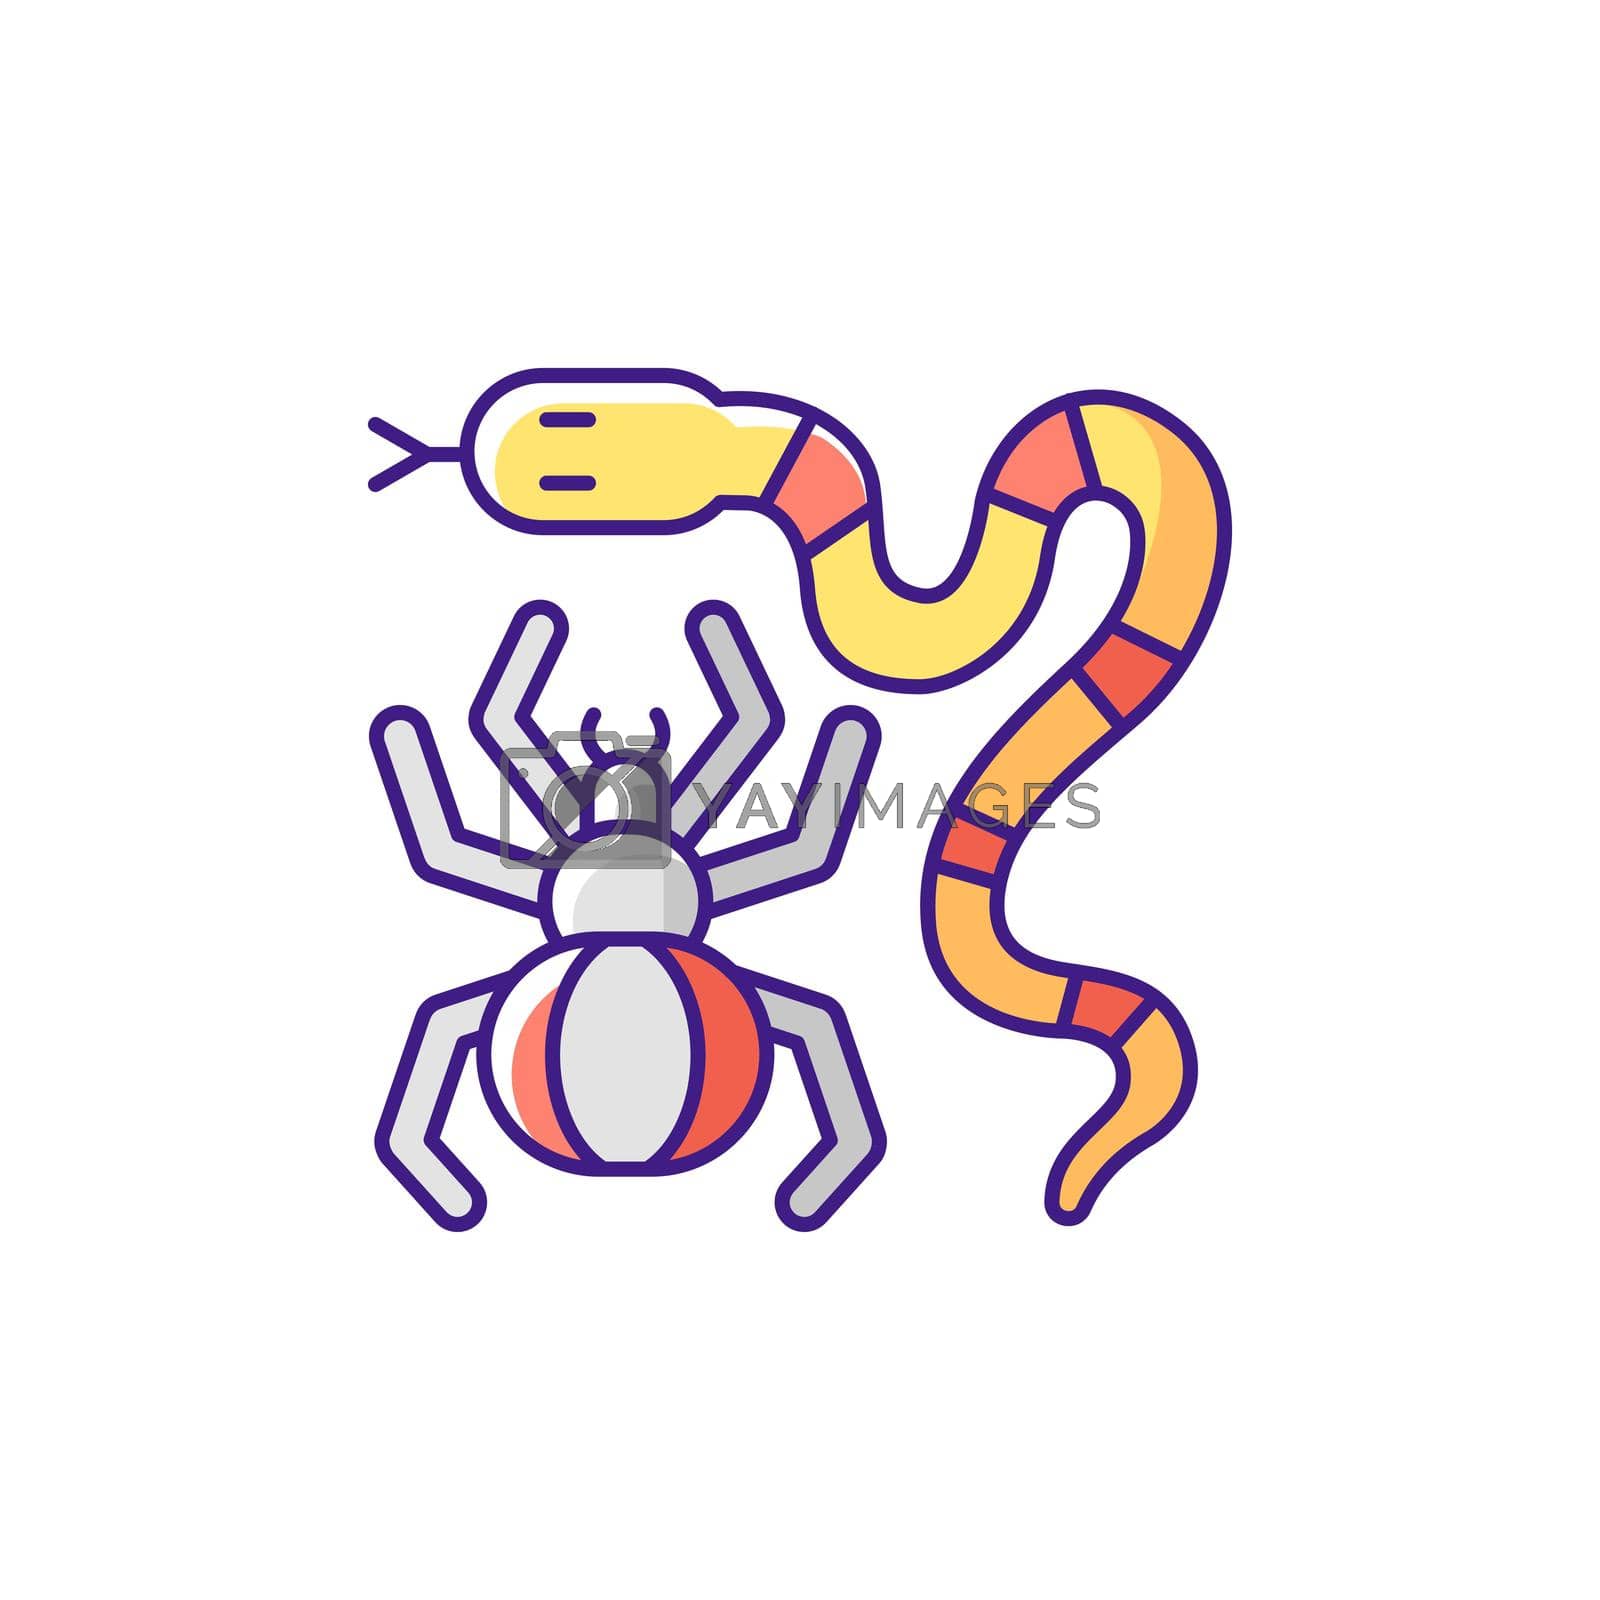 Dangerous animals RGB color icon. Exotic pets. Poisonous snakes and venomous spiders. Wild and potentially dangerous animals. Cobras, vipers and rattlesnakes. Isolated vector illustration